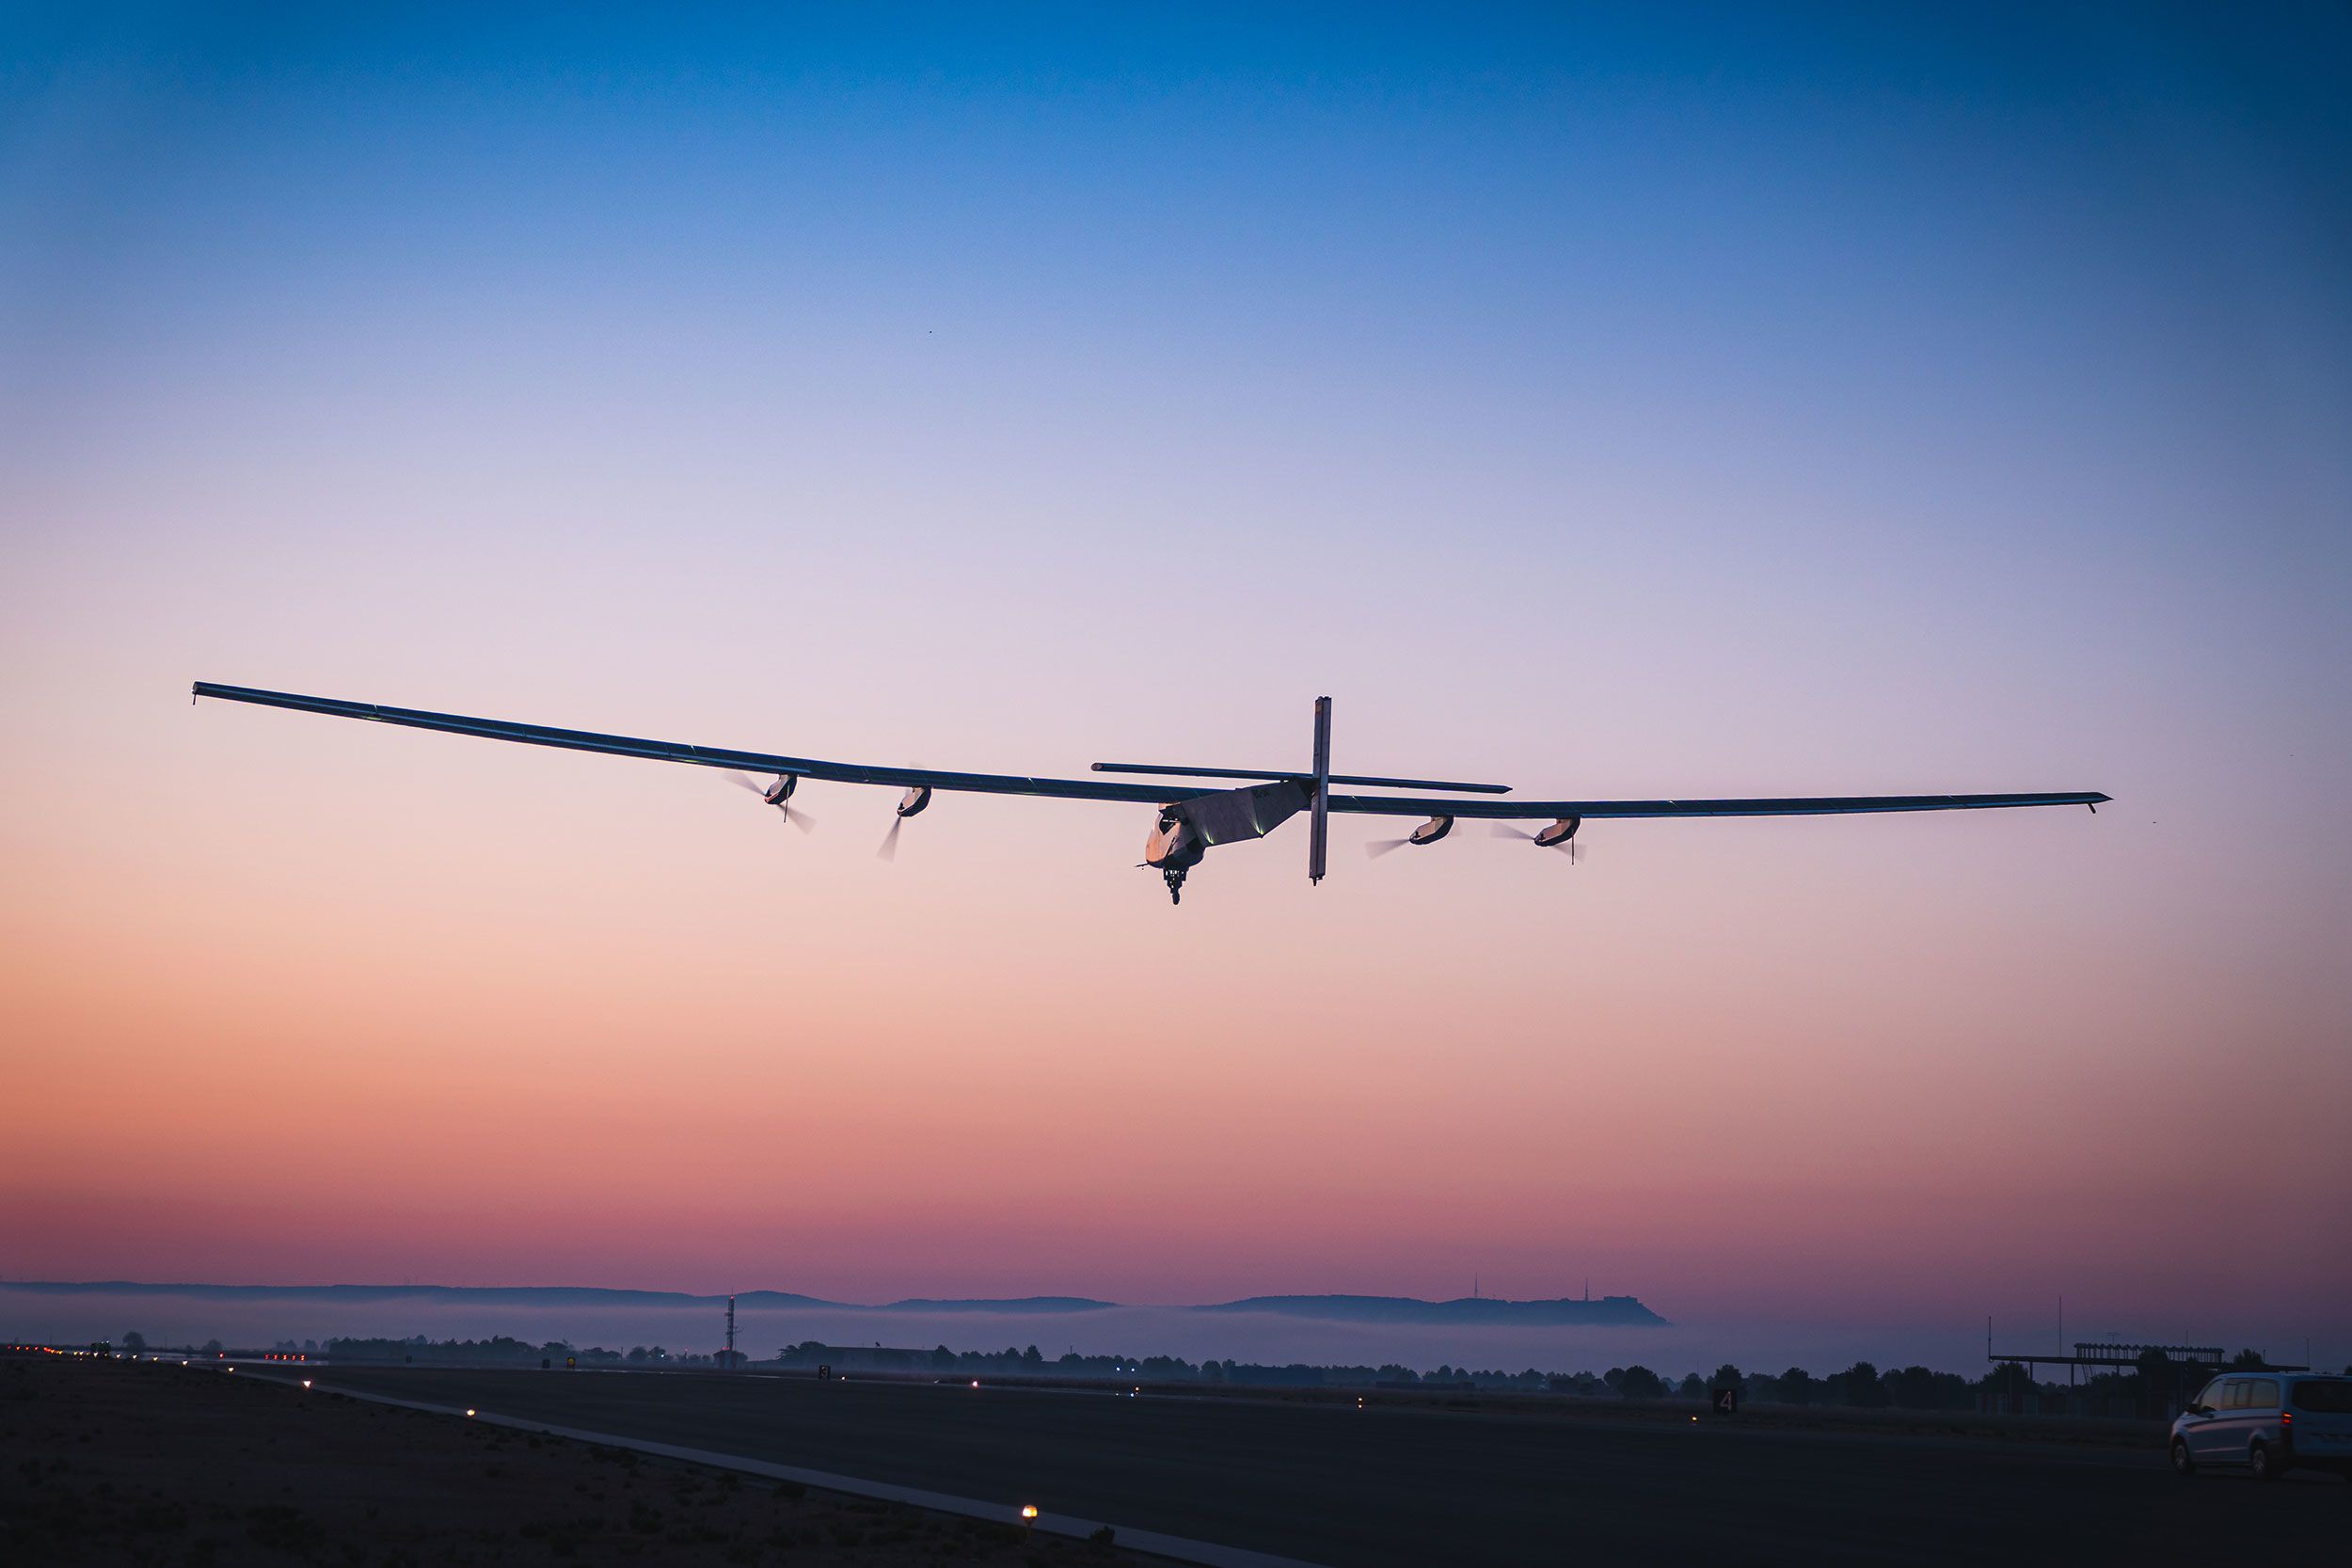 <strong>Shooting for the stars: </strong>From the seas to the skies, solar-powered transport is really taking off. In 2016, the Solar Impulse 2 circumnavigated the globe without using any fuel, charged instead by 17,000 solar panels. Bought in 2019 by US-Spanish startup Skydweller Aero, the company plans to turn the plane into the <a href="index.php?page=&url=https%3A%2F%2Fedition.cnn.com%2Ftravel%2Farticle%2Fskydweller-solar-powered-plane-solar-impulse-climate-scn-spc-intl%2Findex.html" target="_blank">world's first commercially viable "pseudo-satellite."</a> Using solar power, it will be able to stay in the air for months.